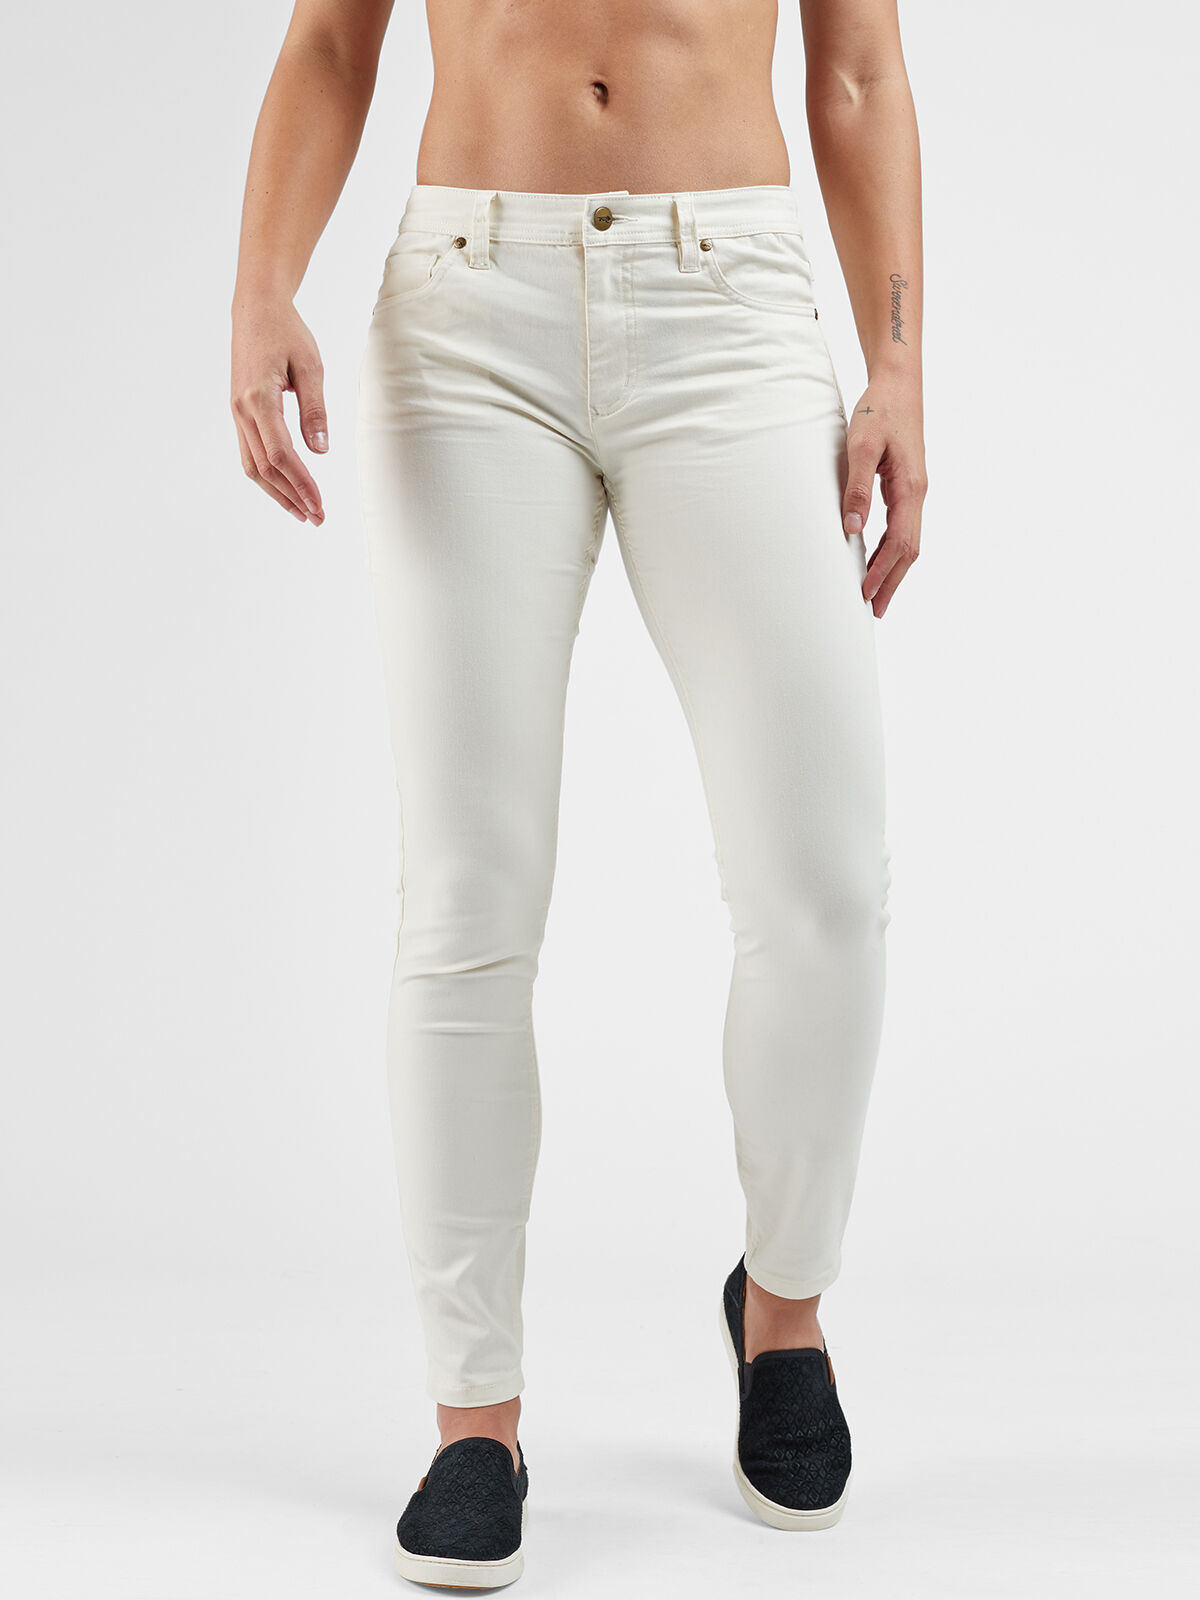 Mast Harbour White Jeans - Buy Mast Harbour White Jeans online in India